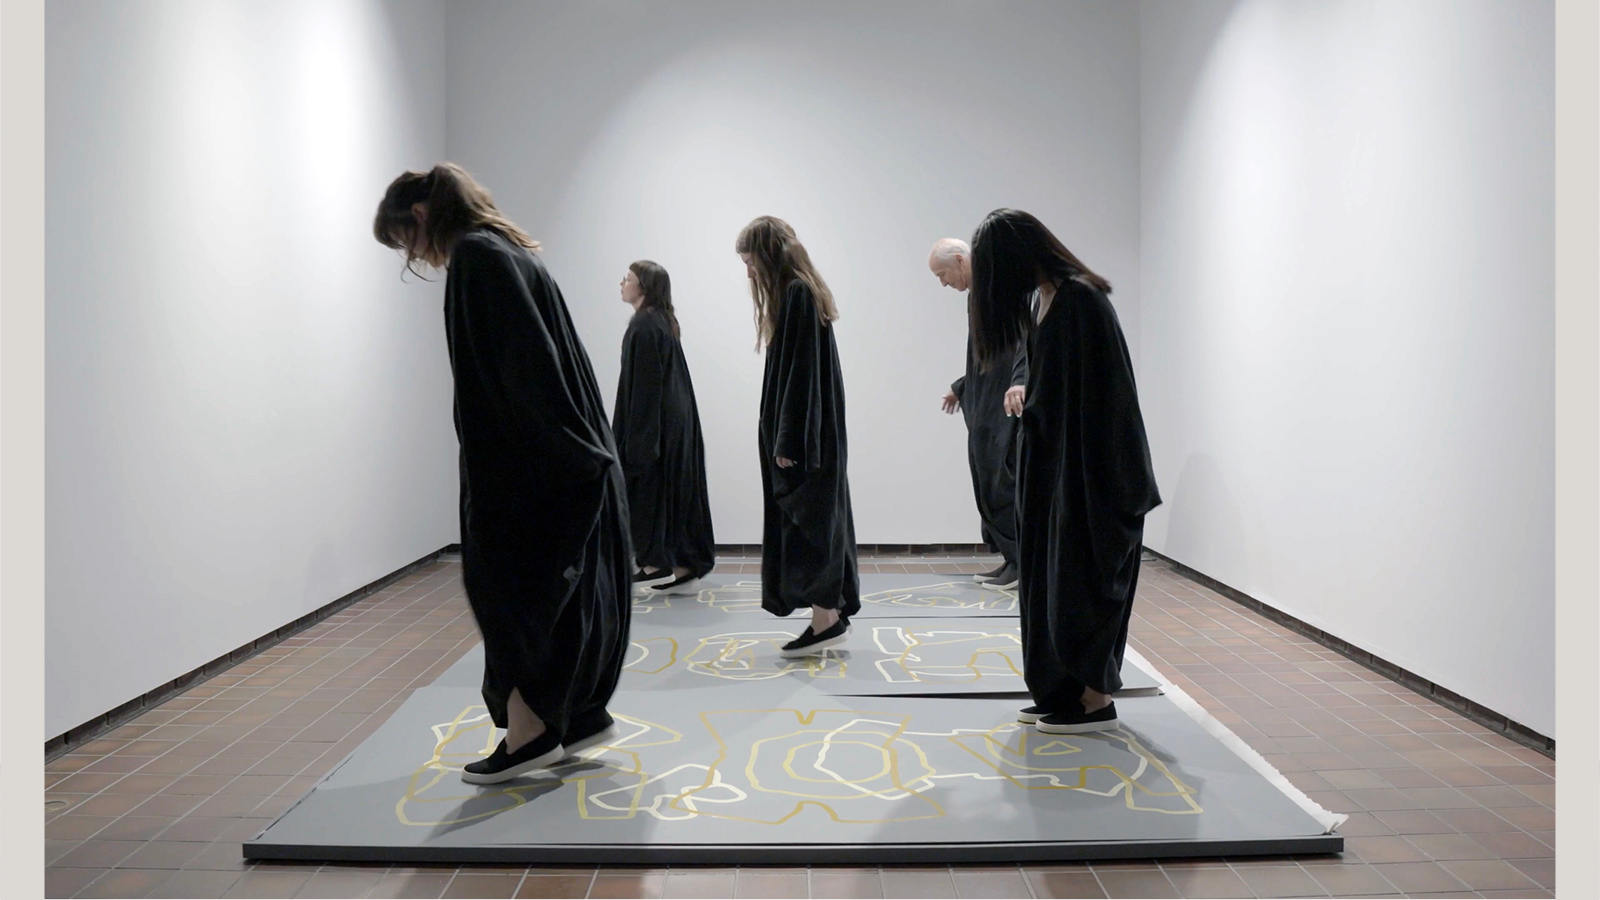 A group of 5 people wearing dark cloaks and matching shoes are facing left in a specific formation. They look like they might be dancing. They are on a constructed wood floor that is painted with abstract patterns and shapes.